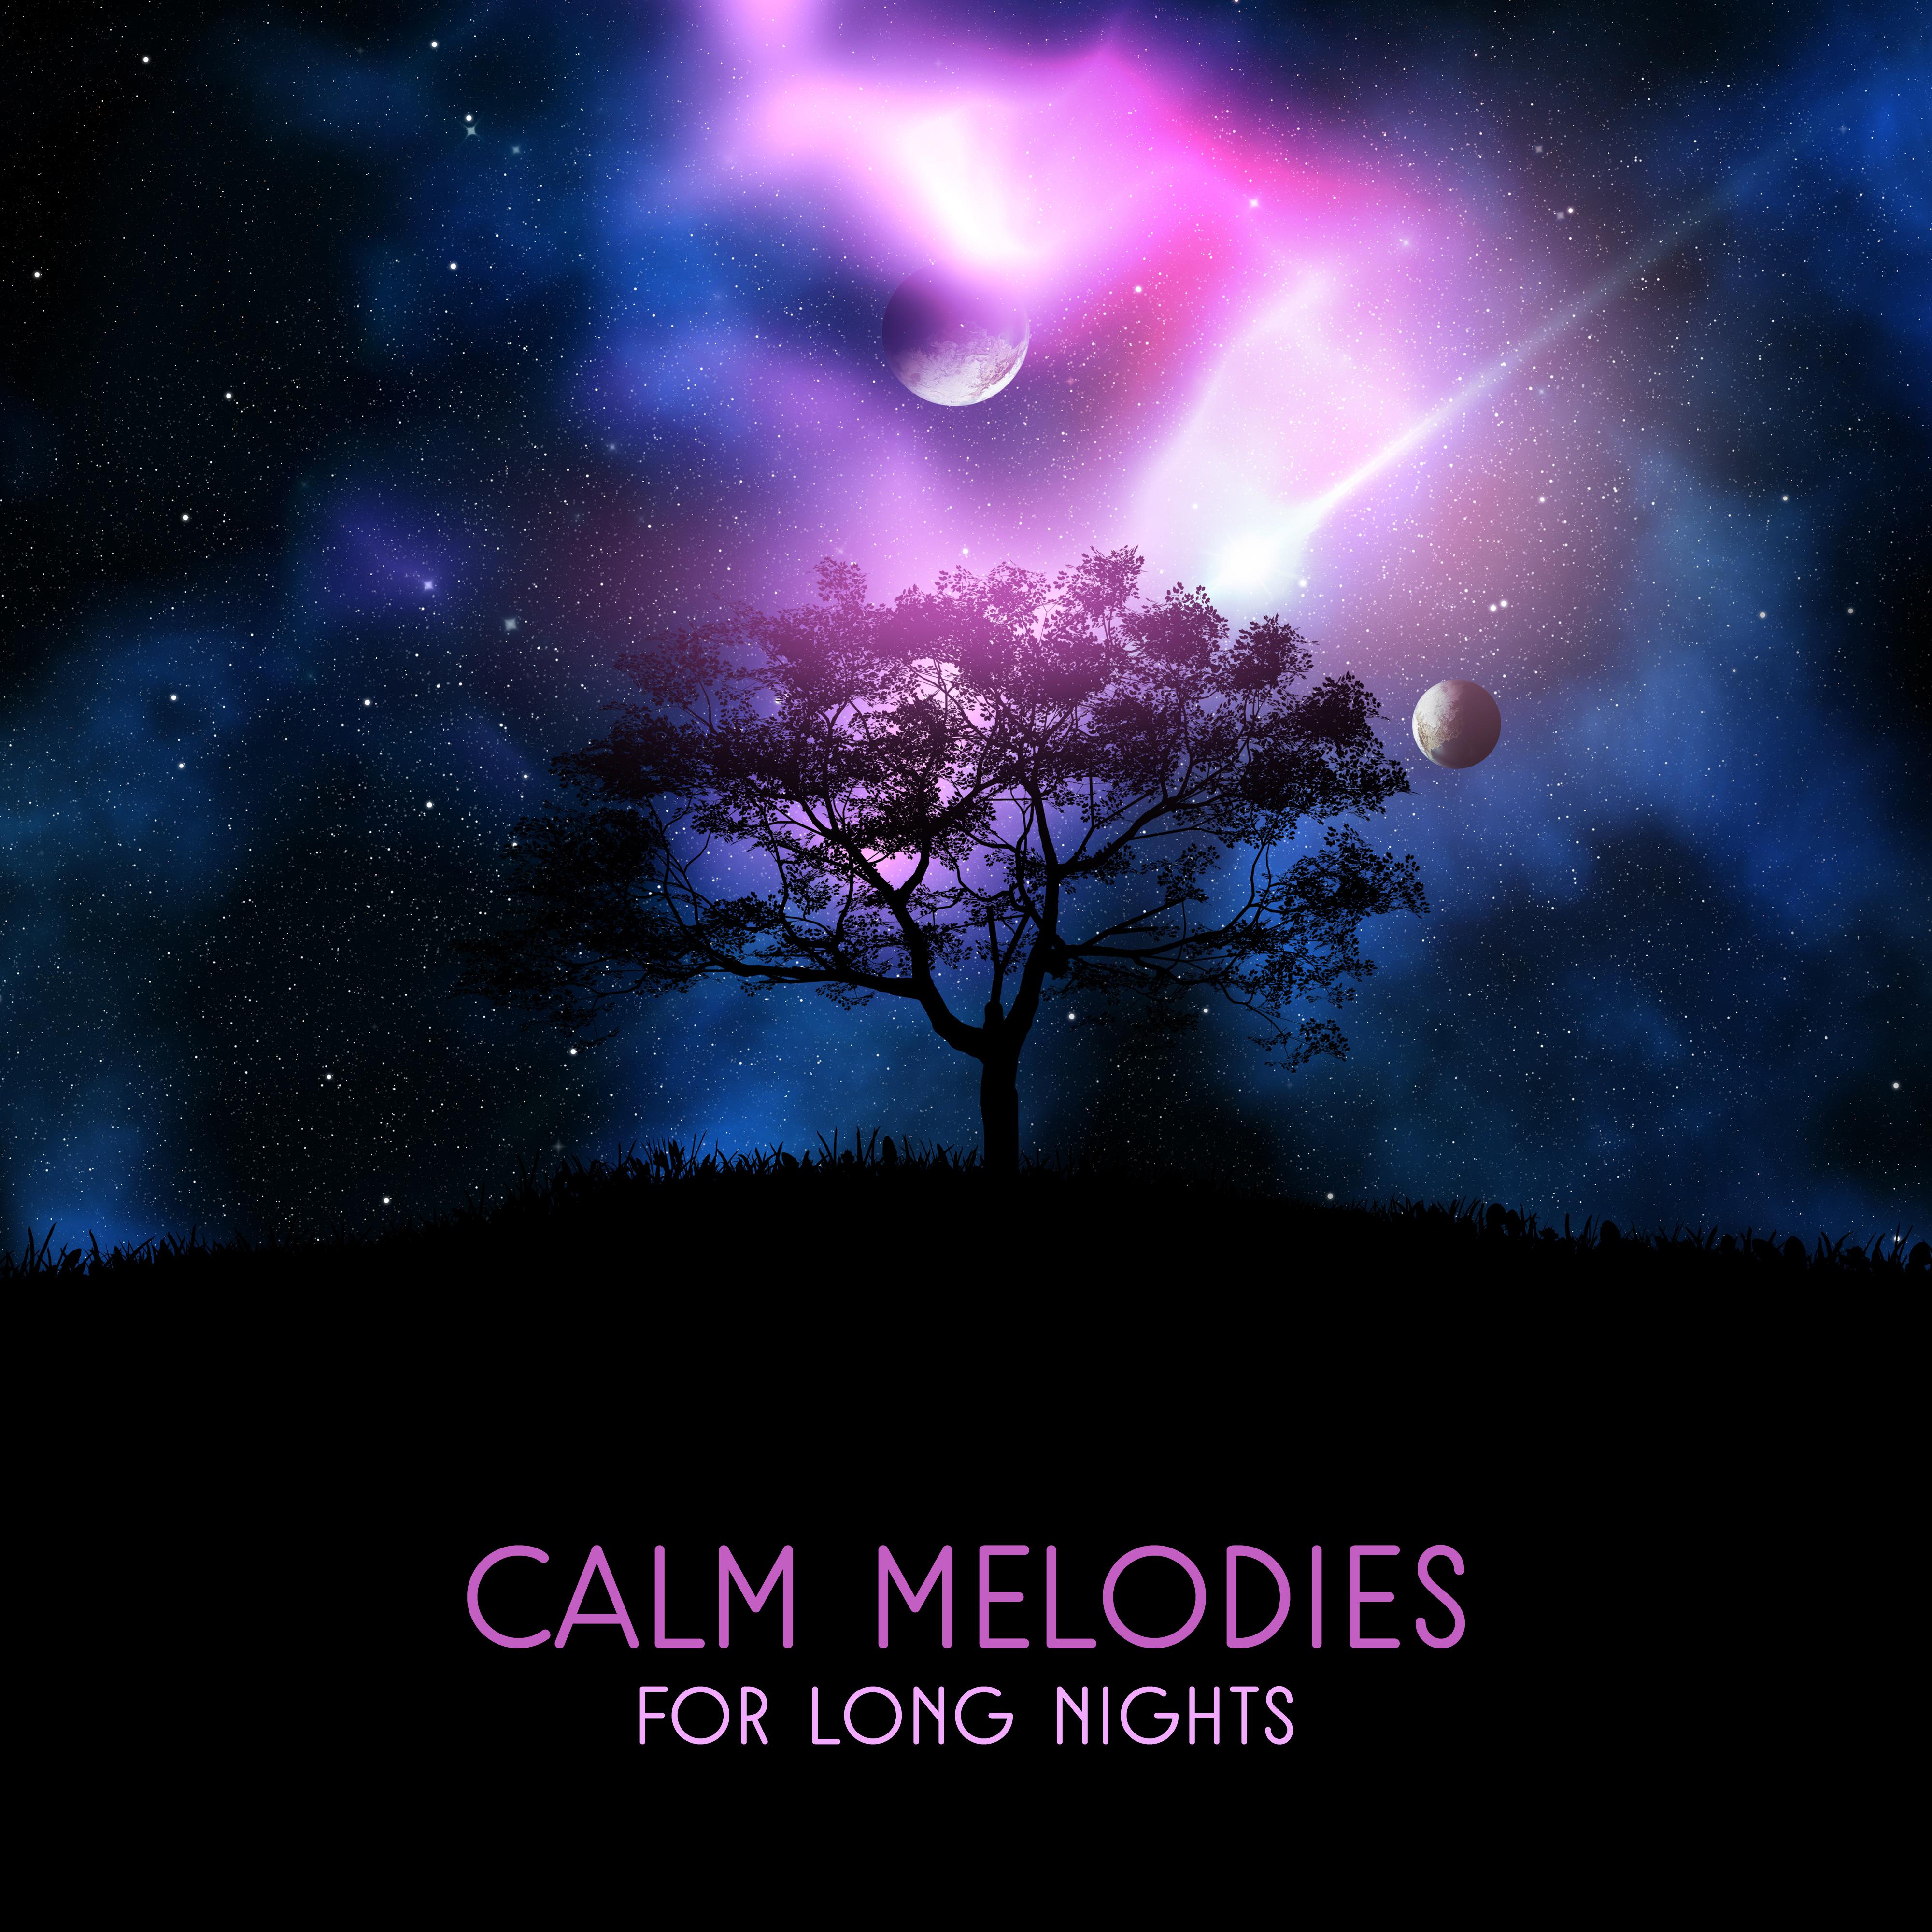 Calm Melodies for Long Nights